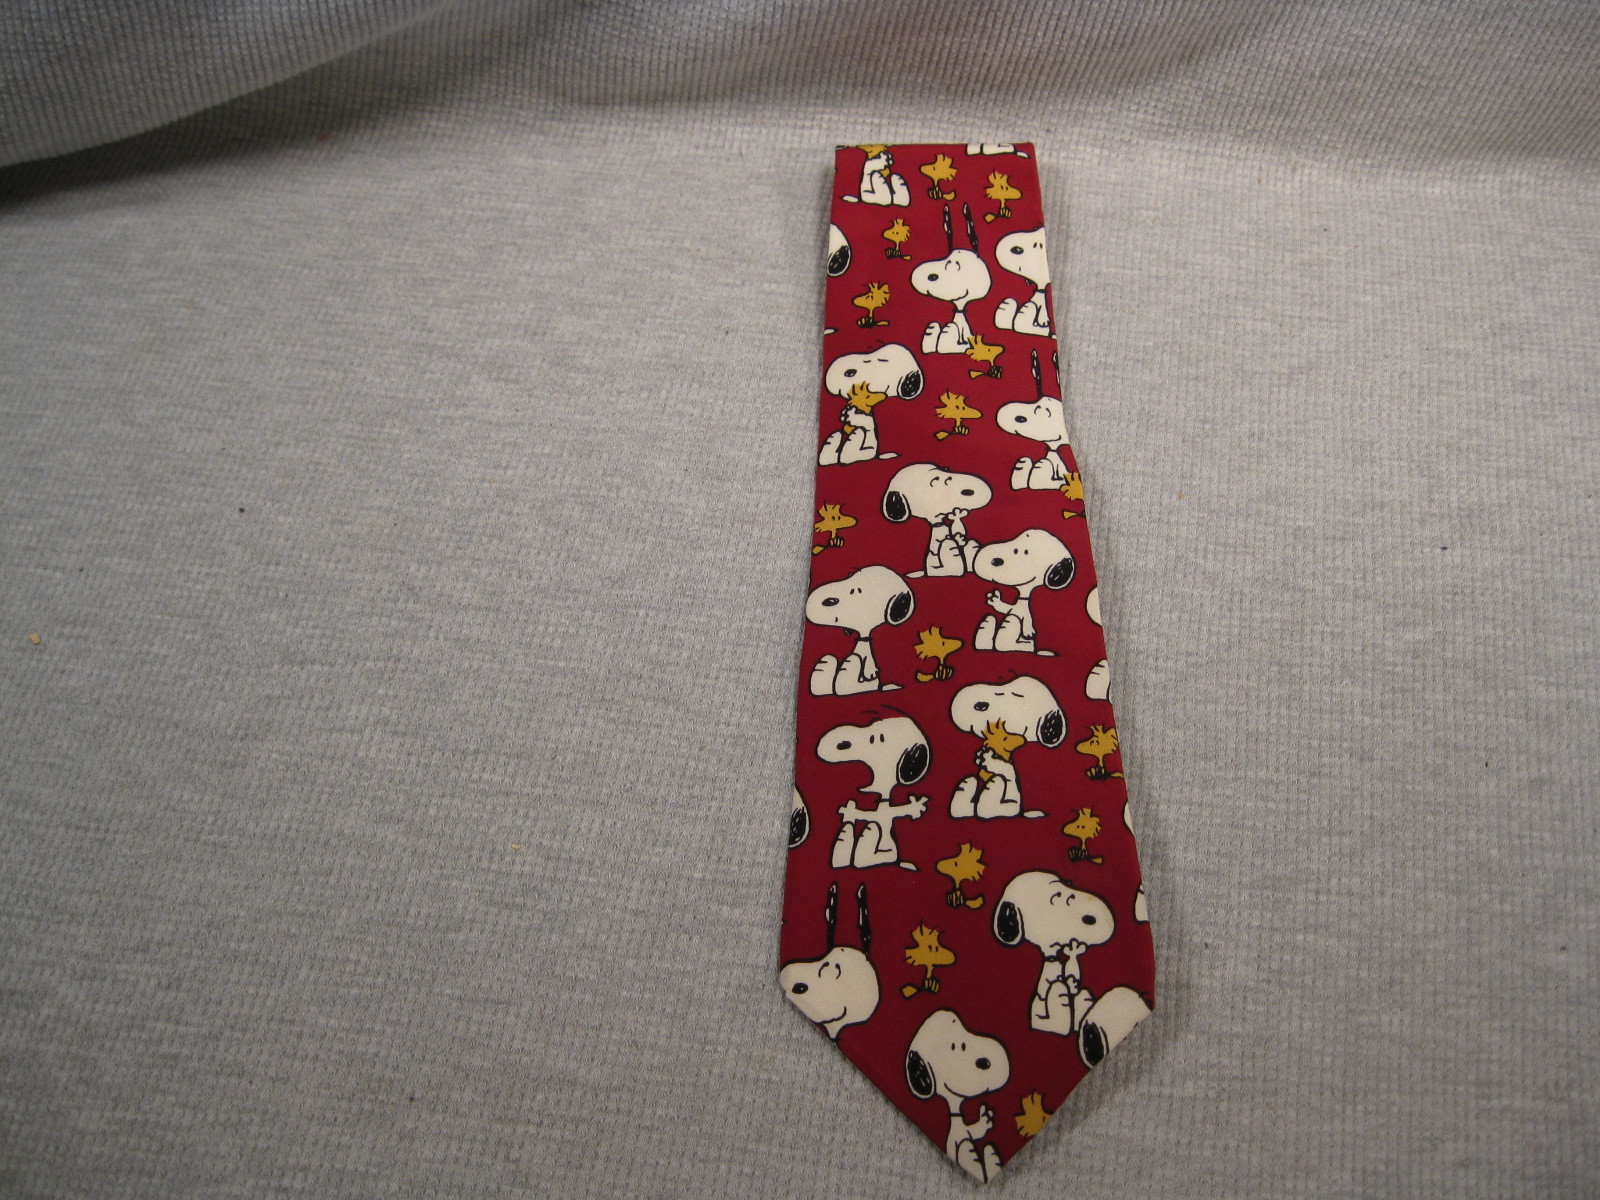 Peanuts Necktie Snoopy and Woodstock Pals - $9.99